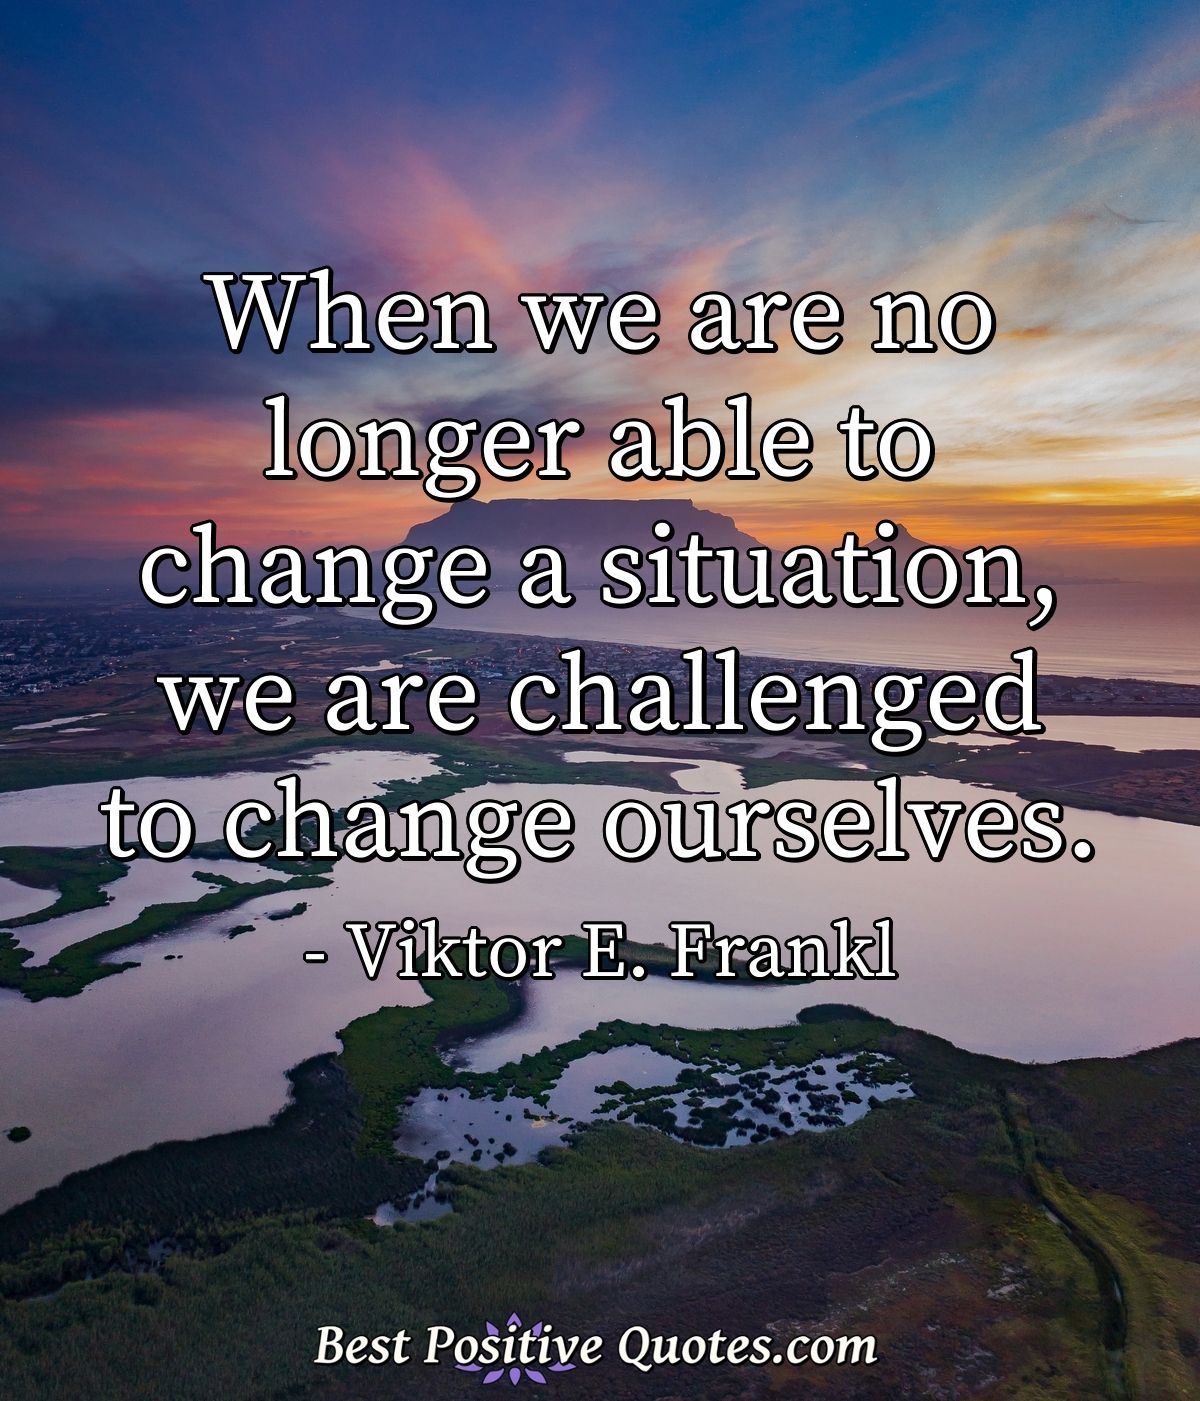 When we are no longer able to change a situation, we are challenged to change ourselves. - Viktor E. Frankl